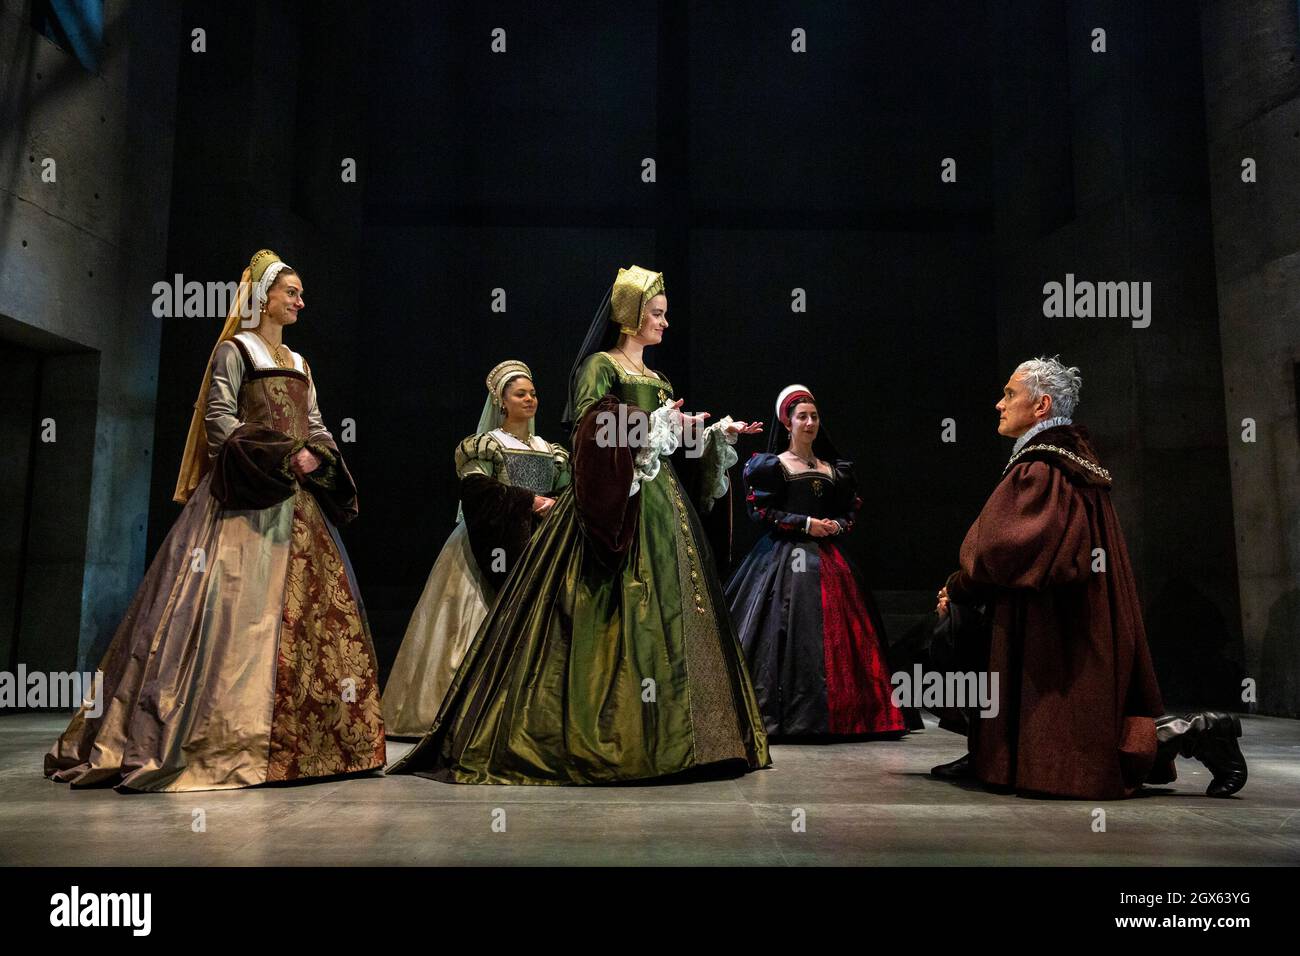 l-r: Jo Herbert (Jane, Lady Rochford), Aurora Dawson-Hunte (Elizabeth Seymour), Rosanna Adams (Anna), Olivia Marcus (Katherine Howard), Ben Miles (Thomas Cromwell) in THE MIRROR AND THE LIGHT at the Gielgud Theatre, London W1  06/10/2021  adapted from her novel by Hilary Mantel & Ben Miles  music: Stephen Warbeck  design: Christopher Oram  lighting: Jessica Hung Han Yun  movement: Emily Jane Boyle  fights: Rachid Sabitri  director: Jeremy Herrin Stock Photo